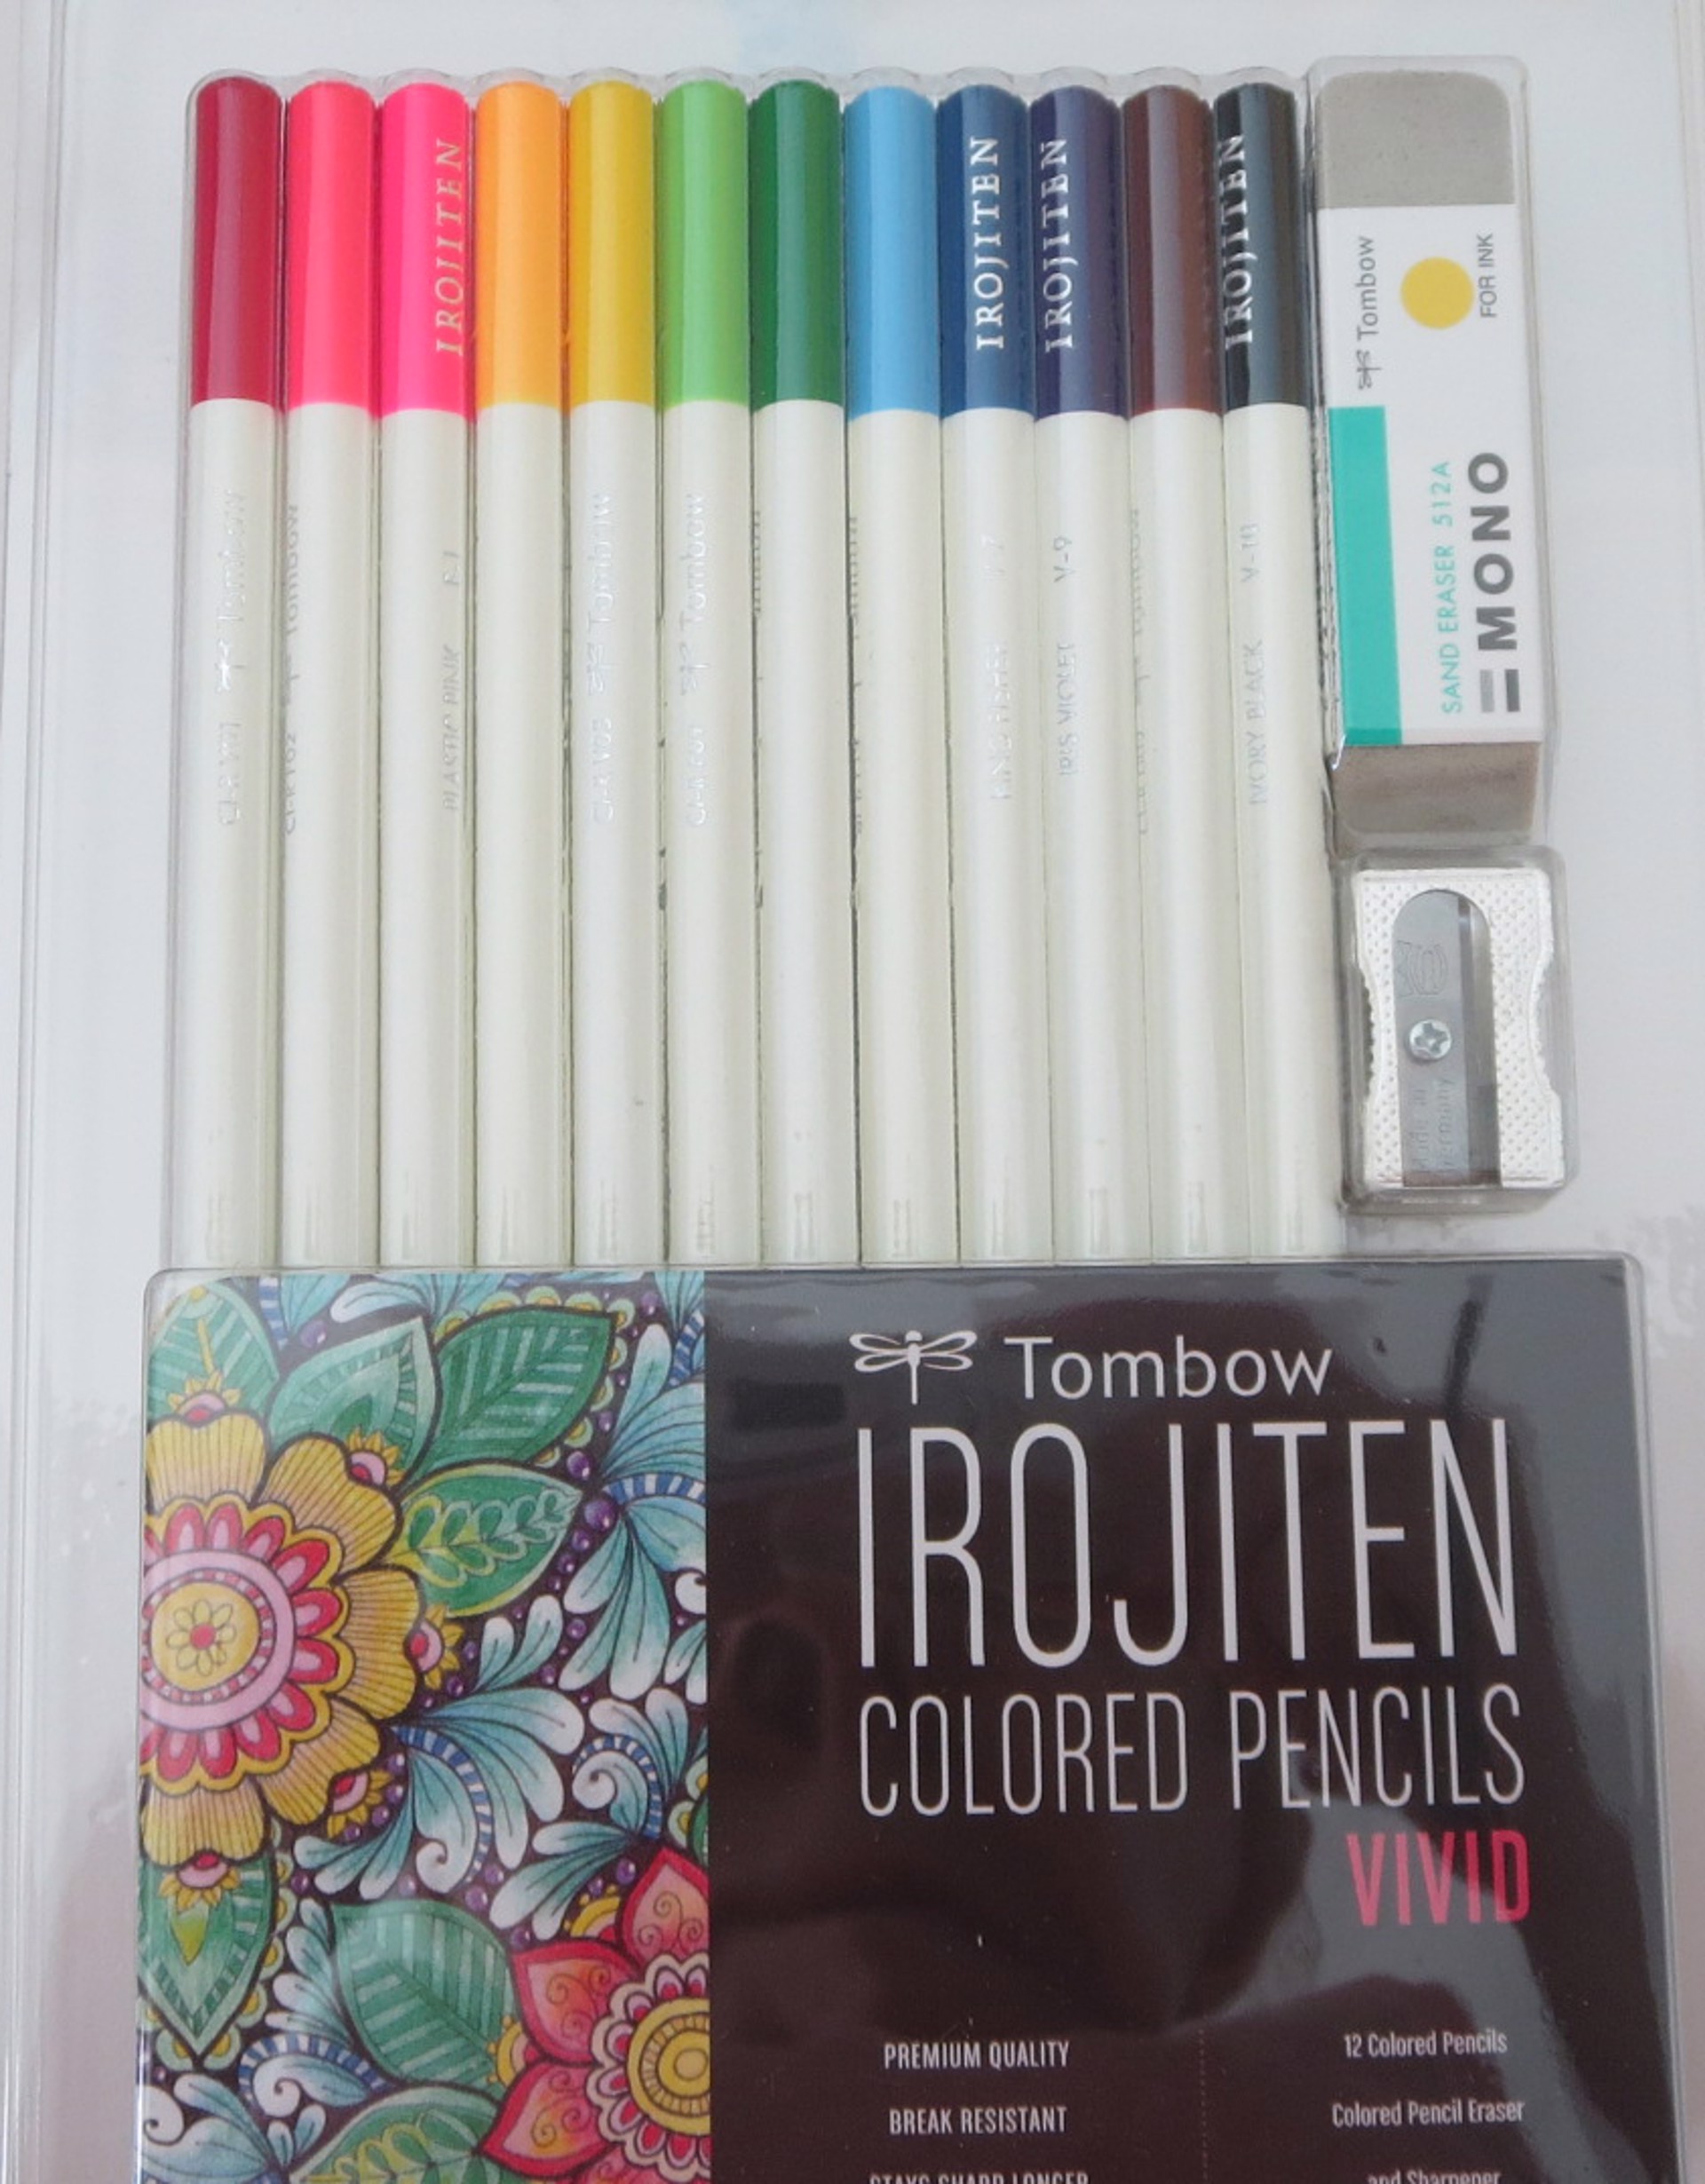 Tombow Colored Pencils -- Vivid by Gift Shop